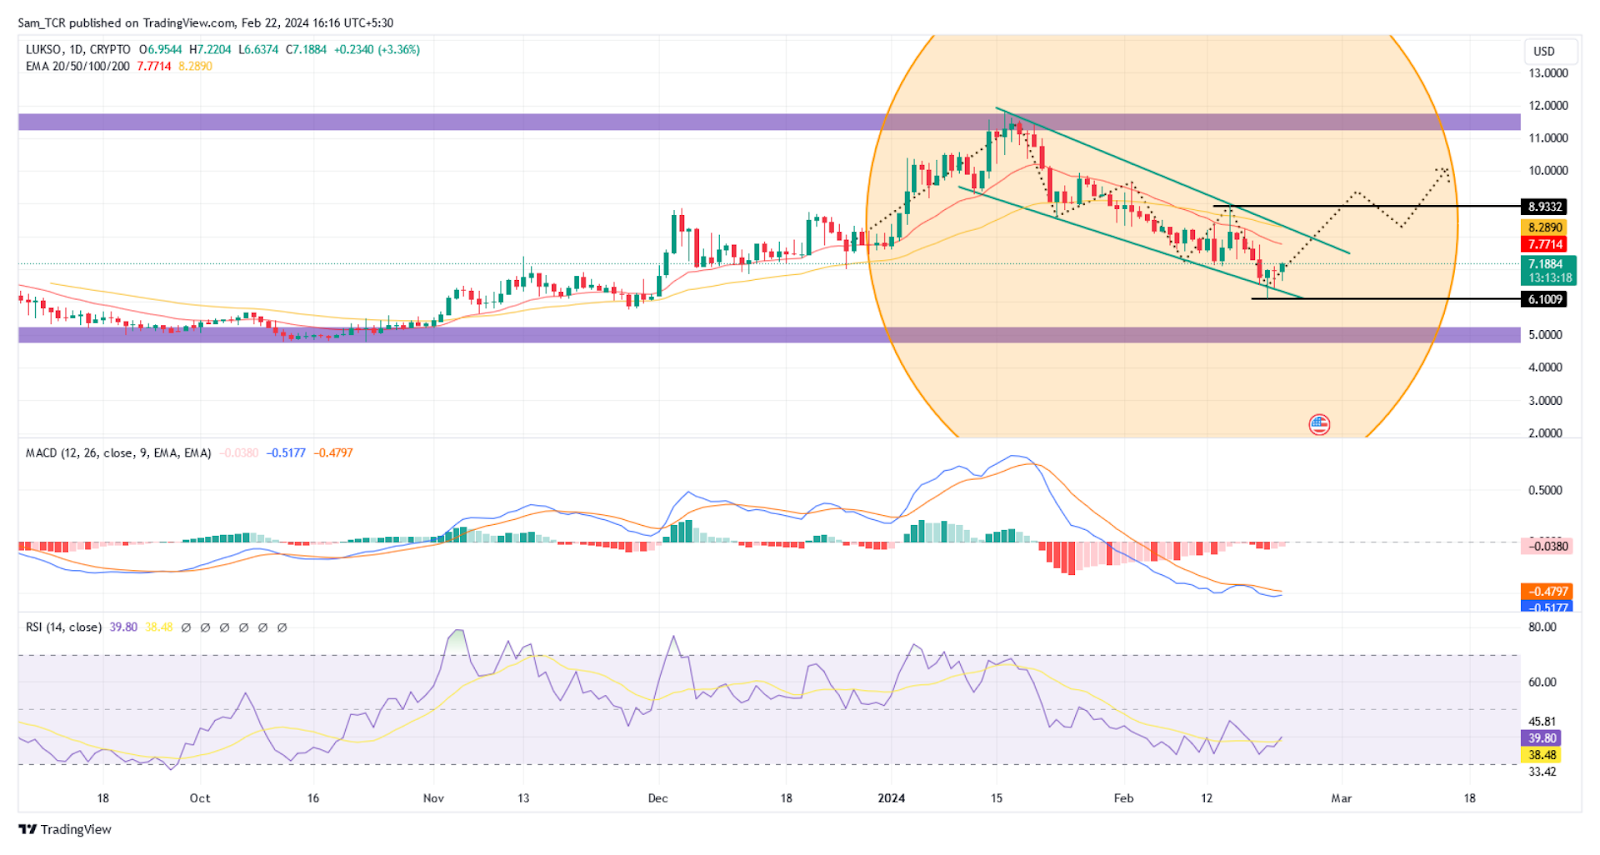 LUKSO Crypto: Can LYX Price Initiate a Rally for the Upside Soon?